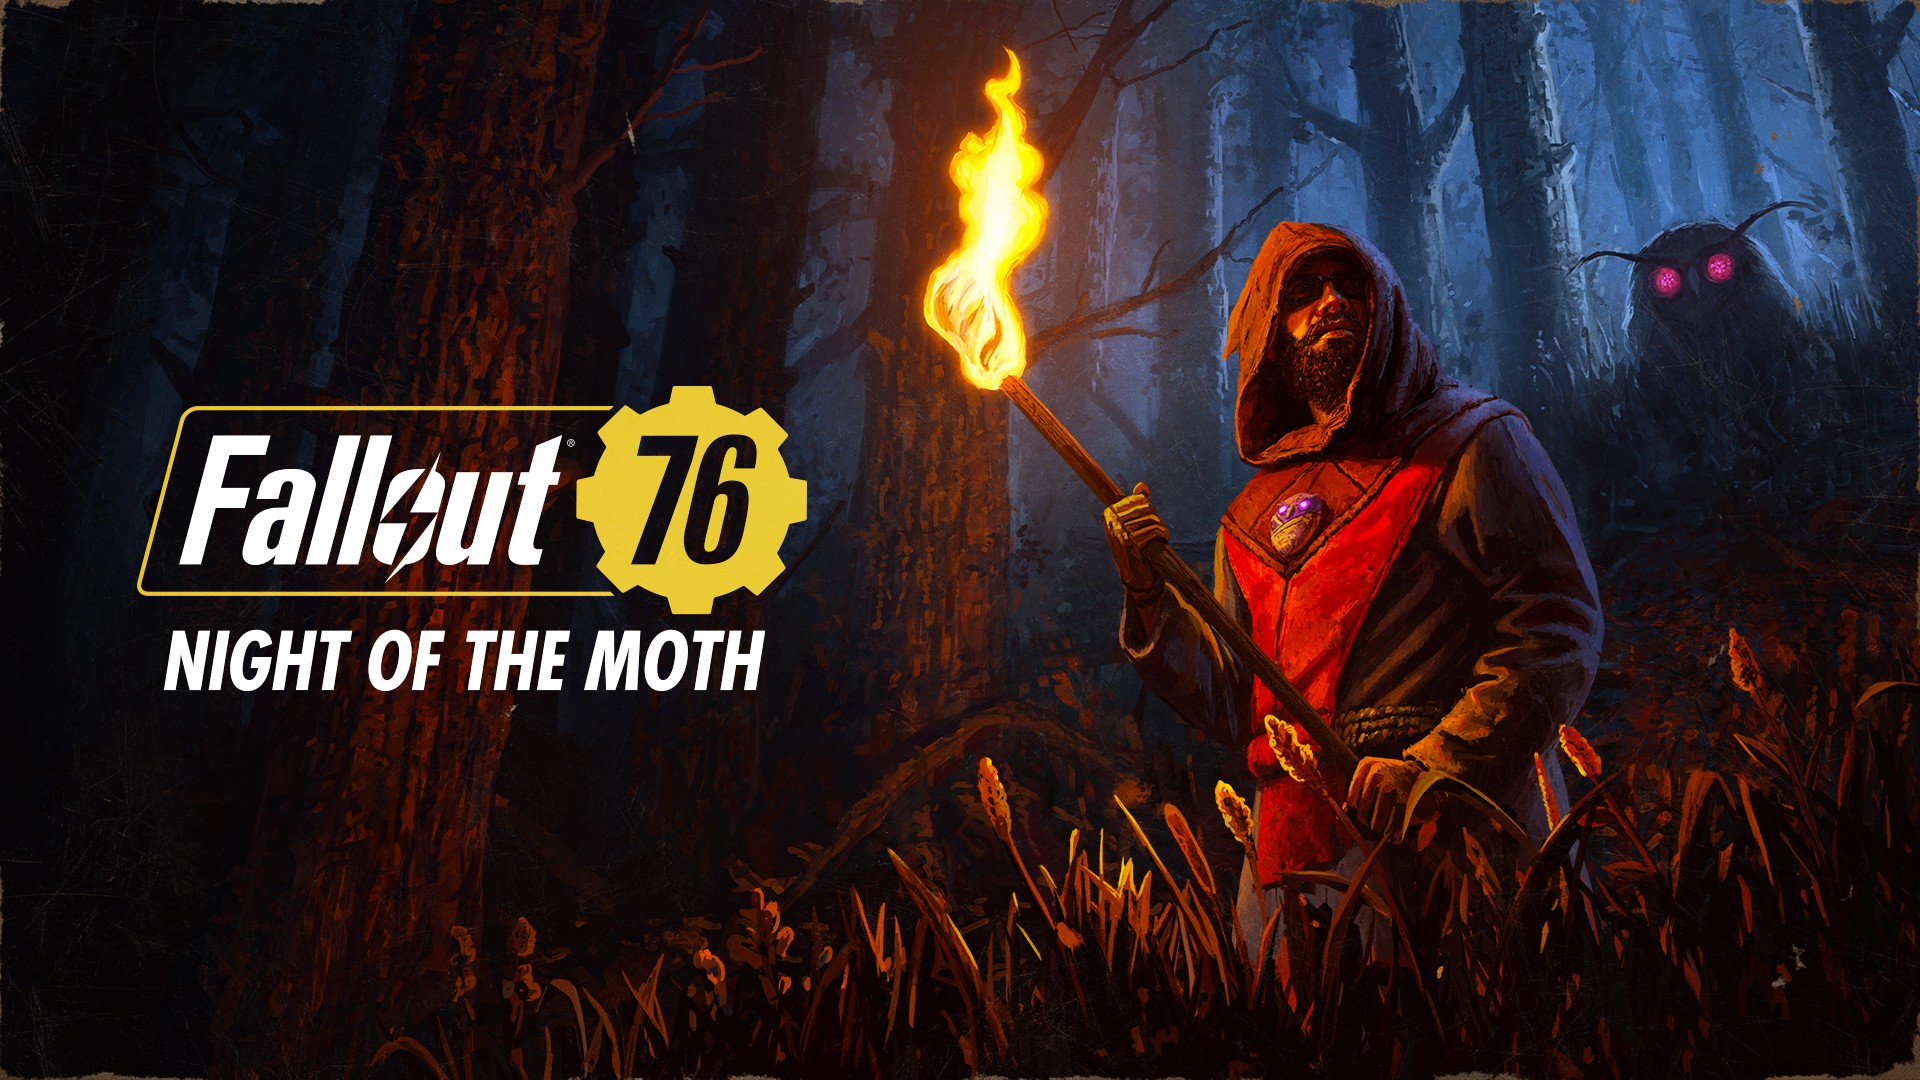 Fallout 76: Night of the Moth